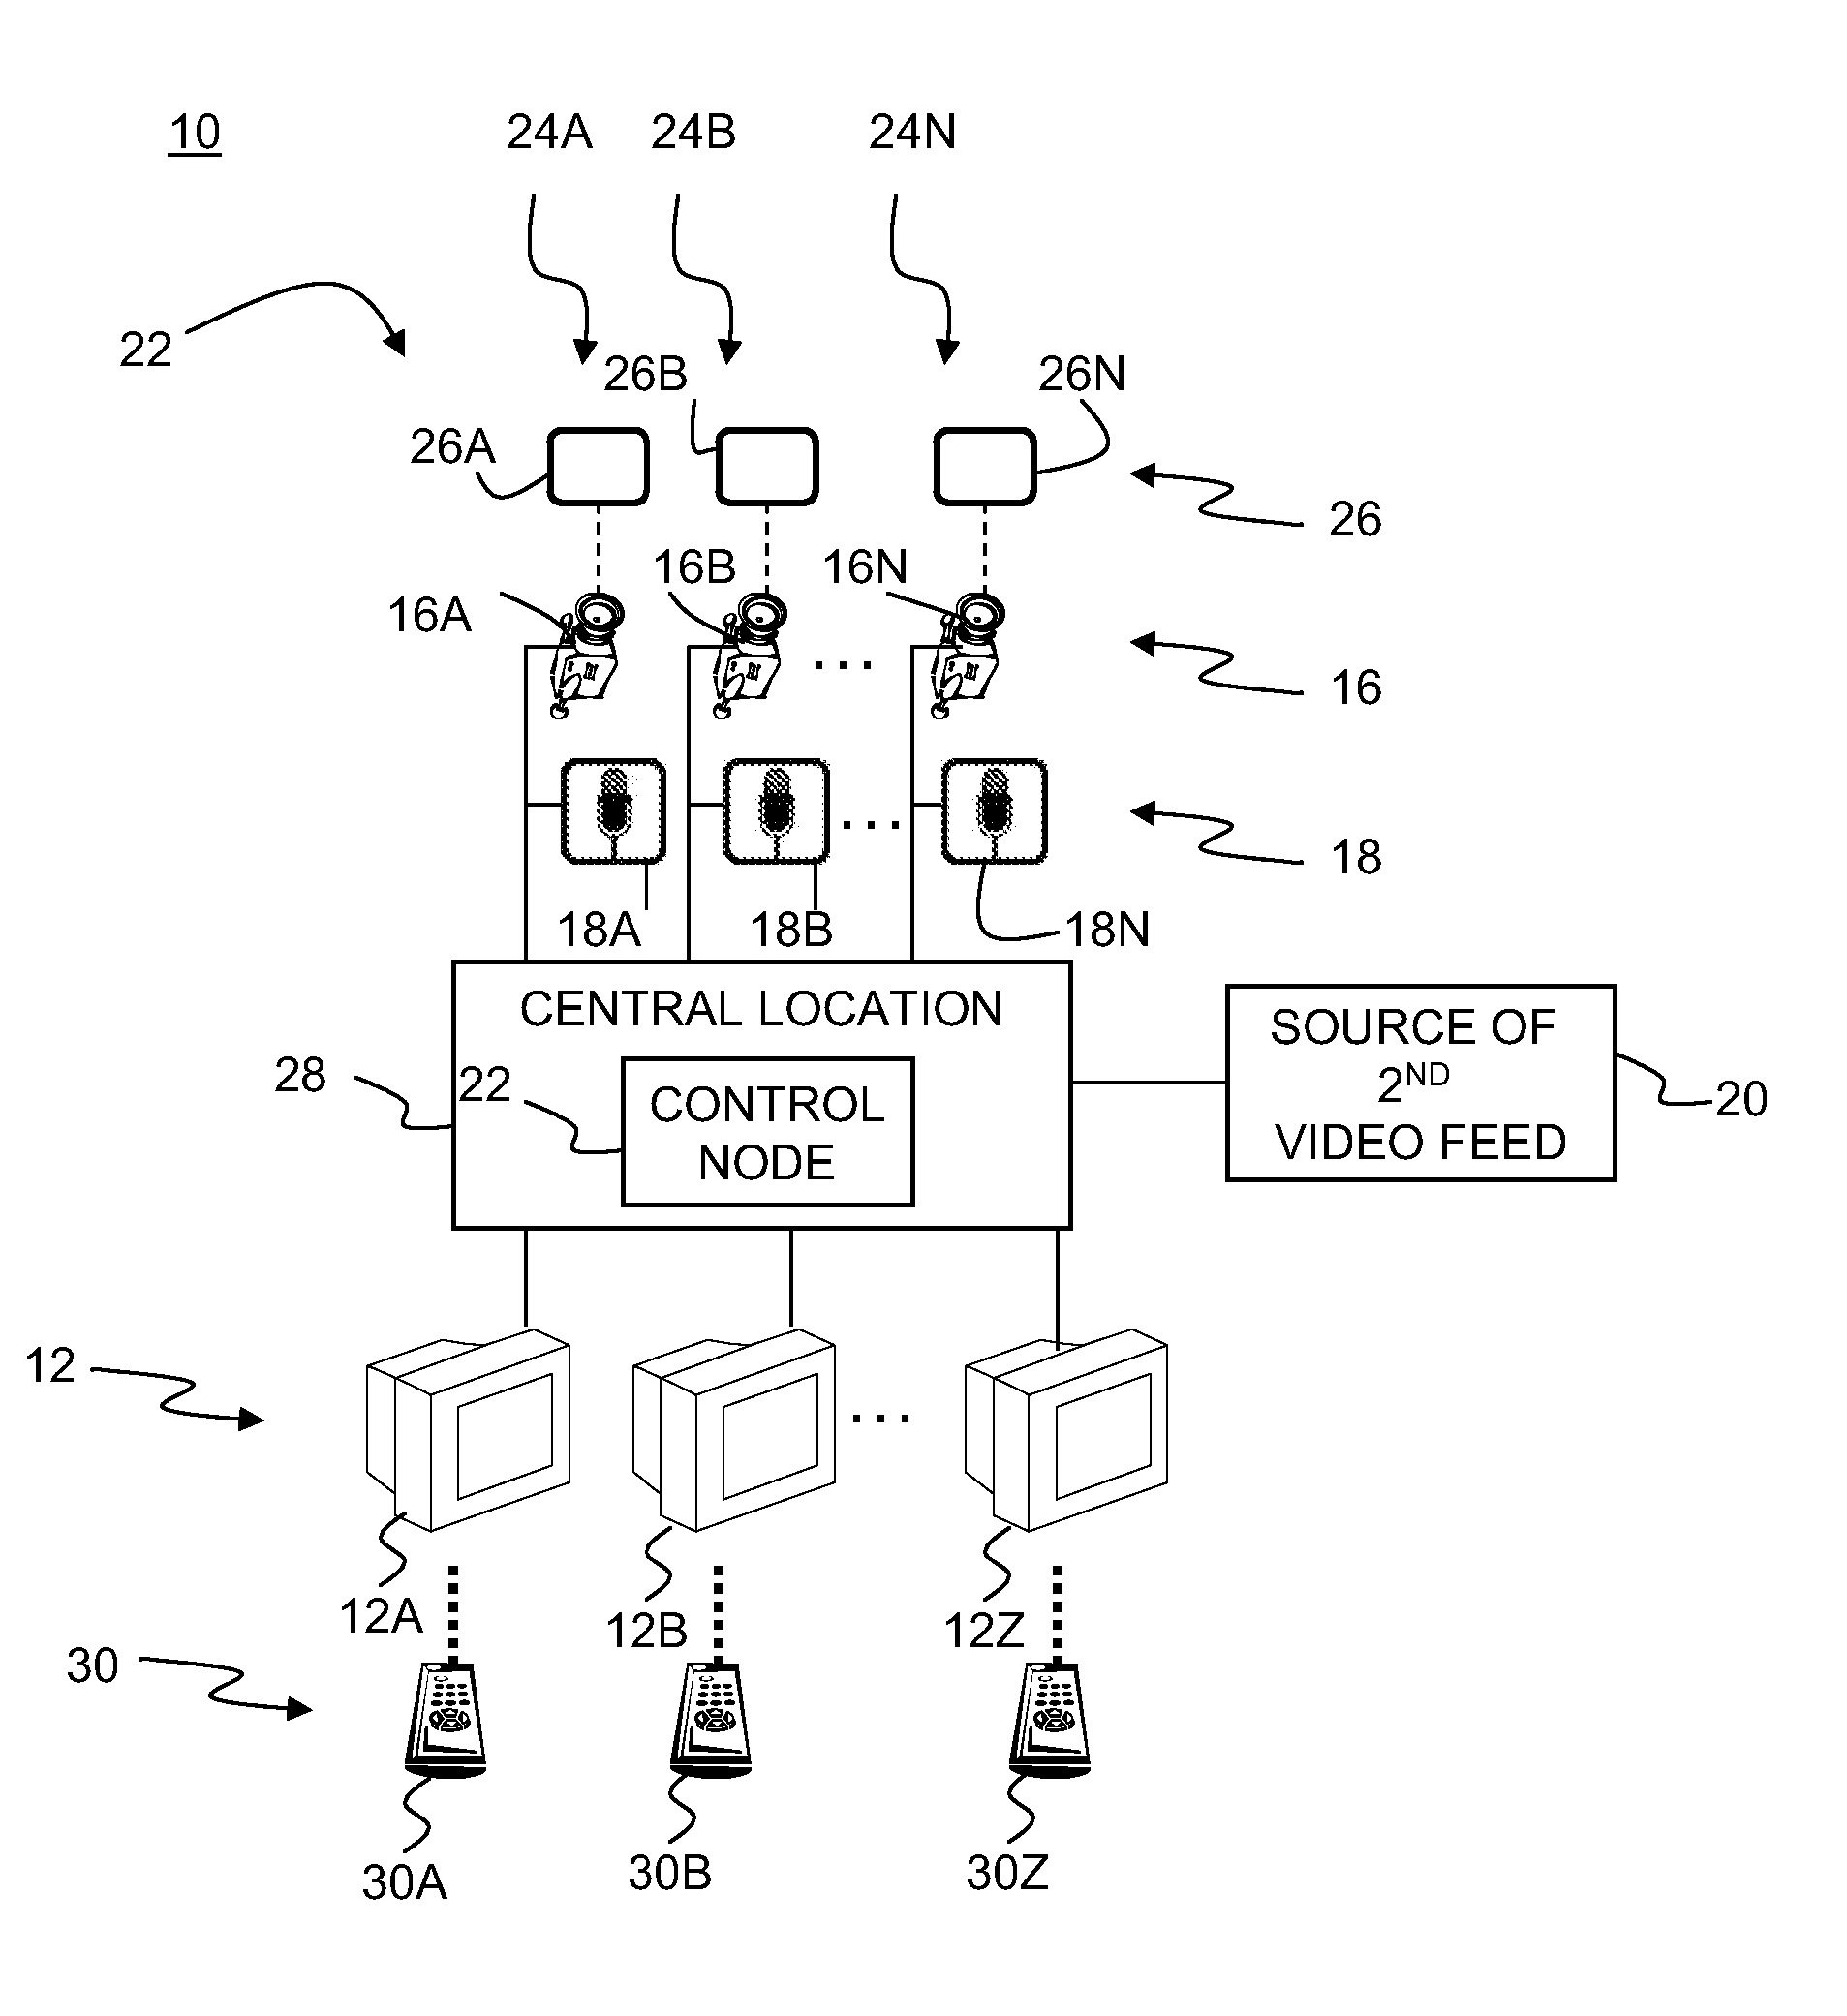 System and method for providing hybrid audio/video system